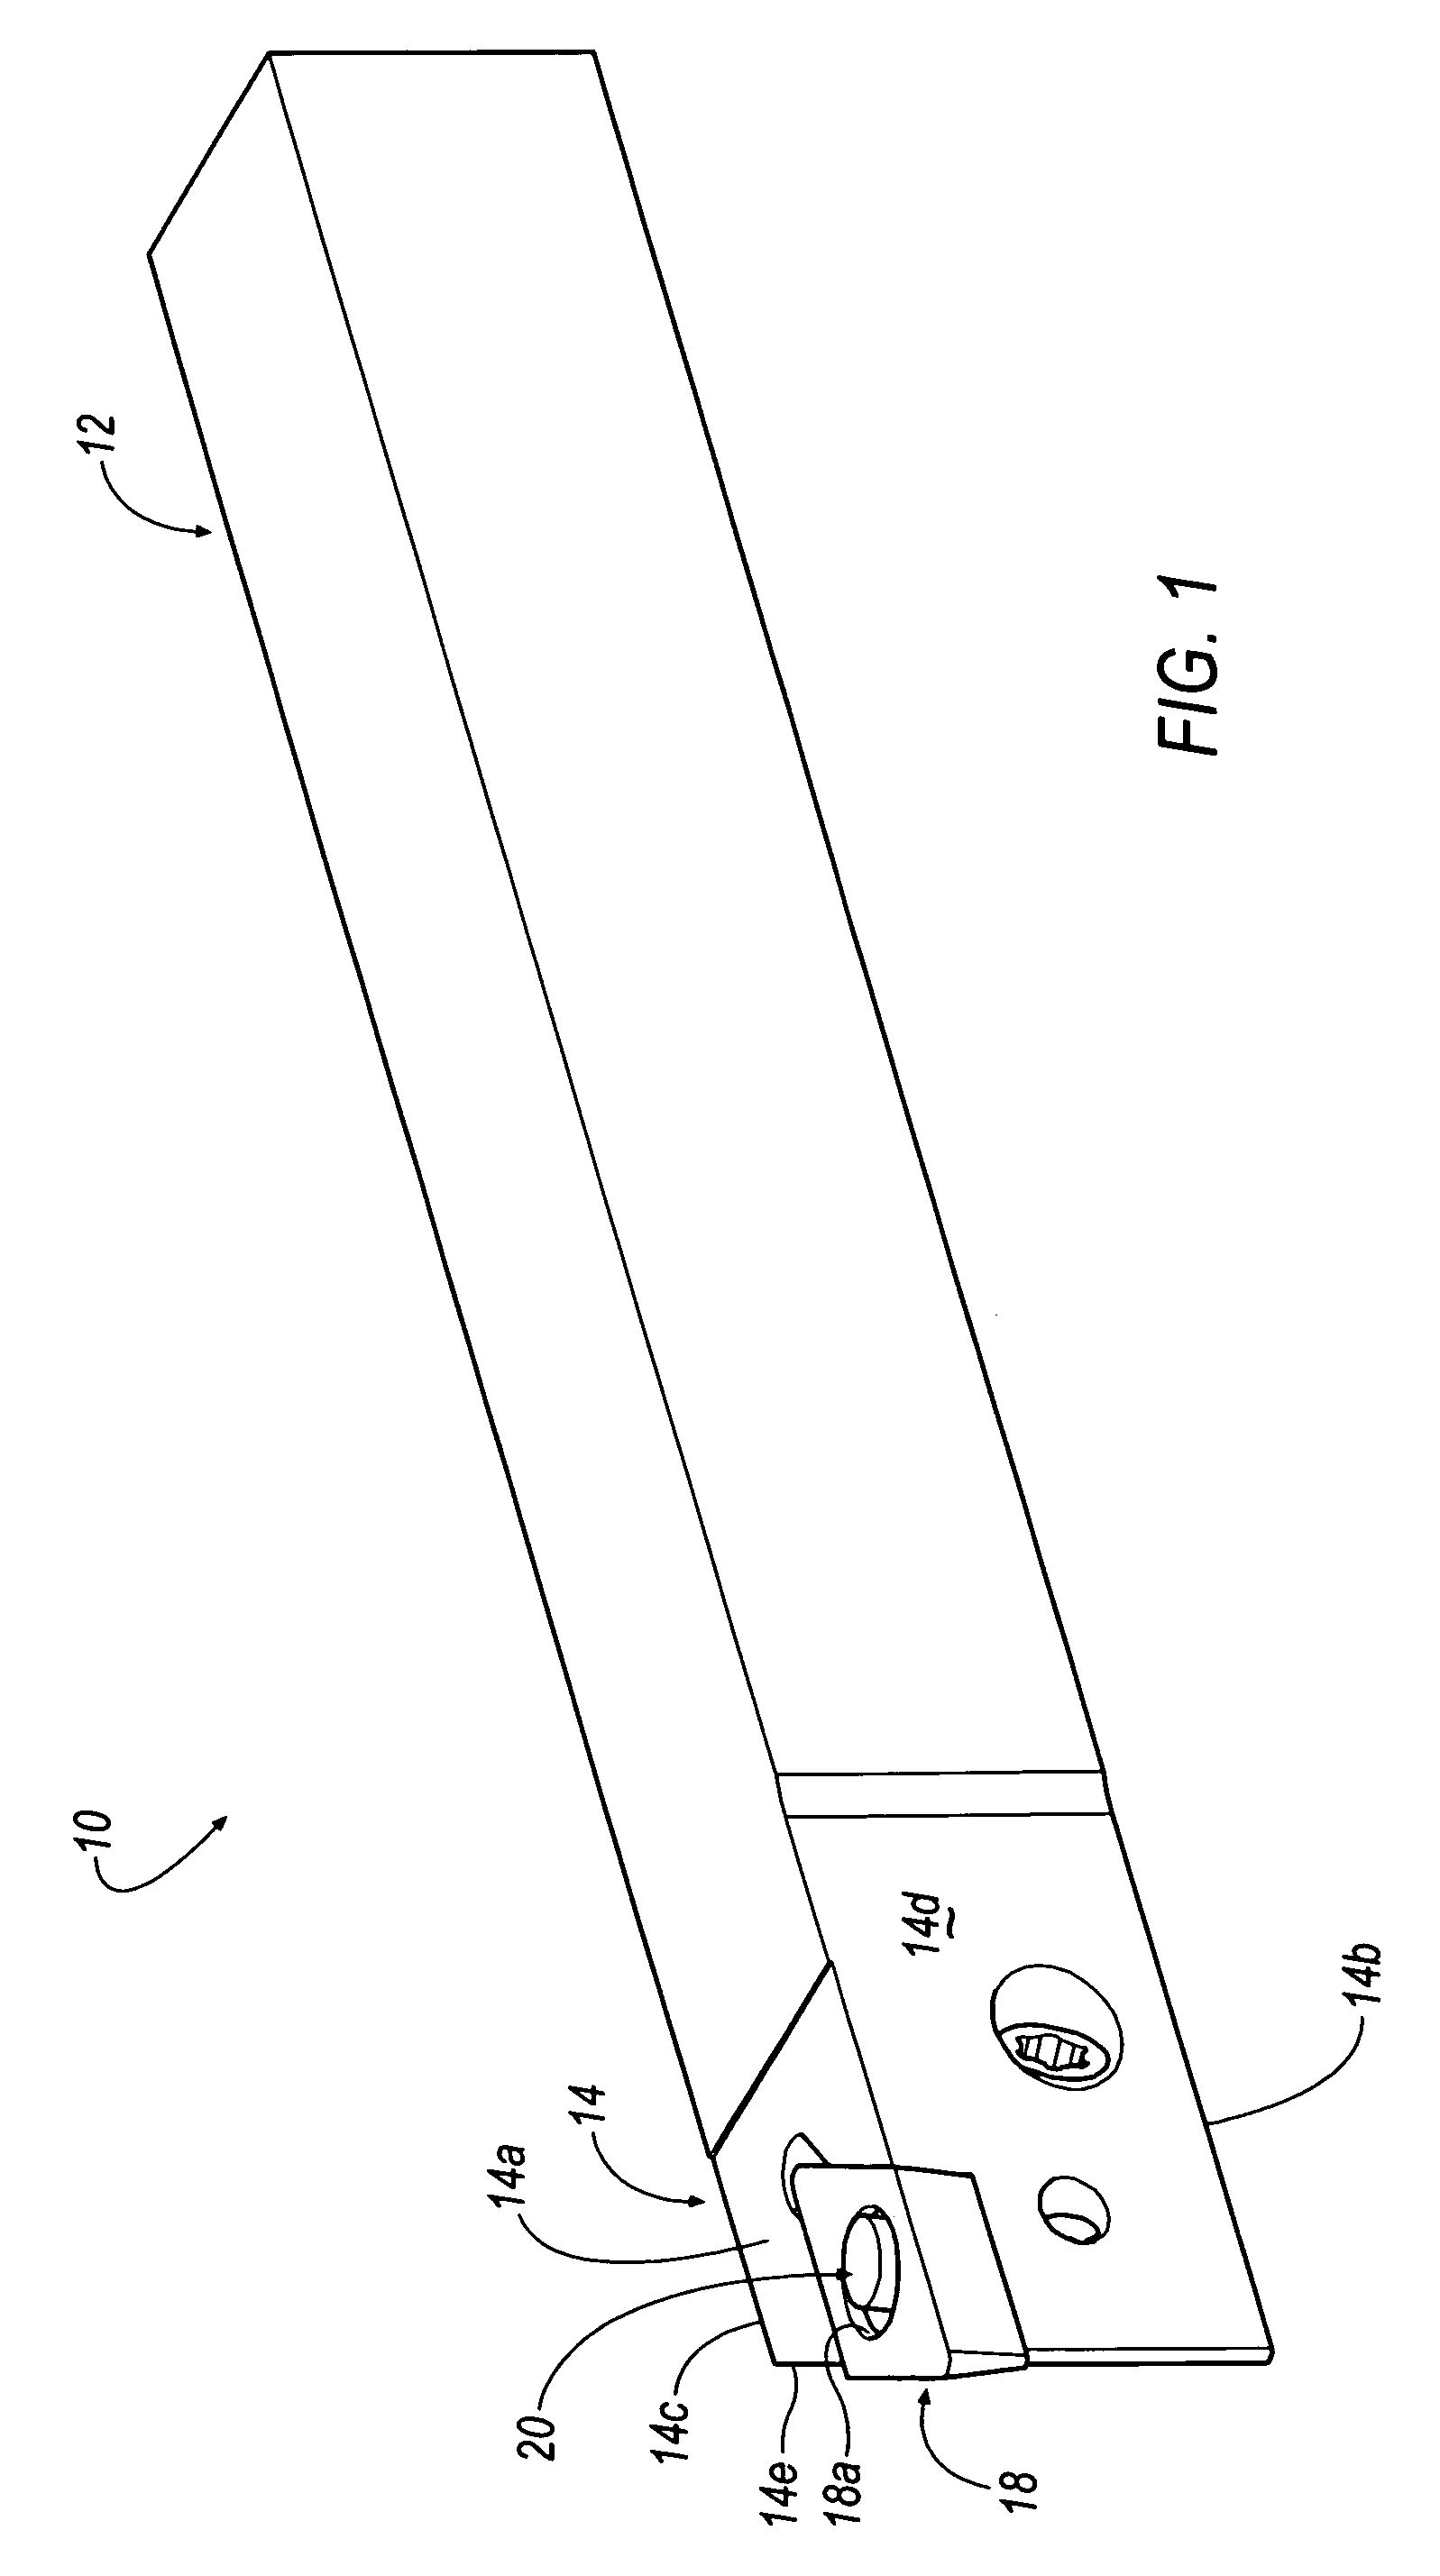 Tool holder with spherical contact points